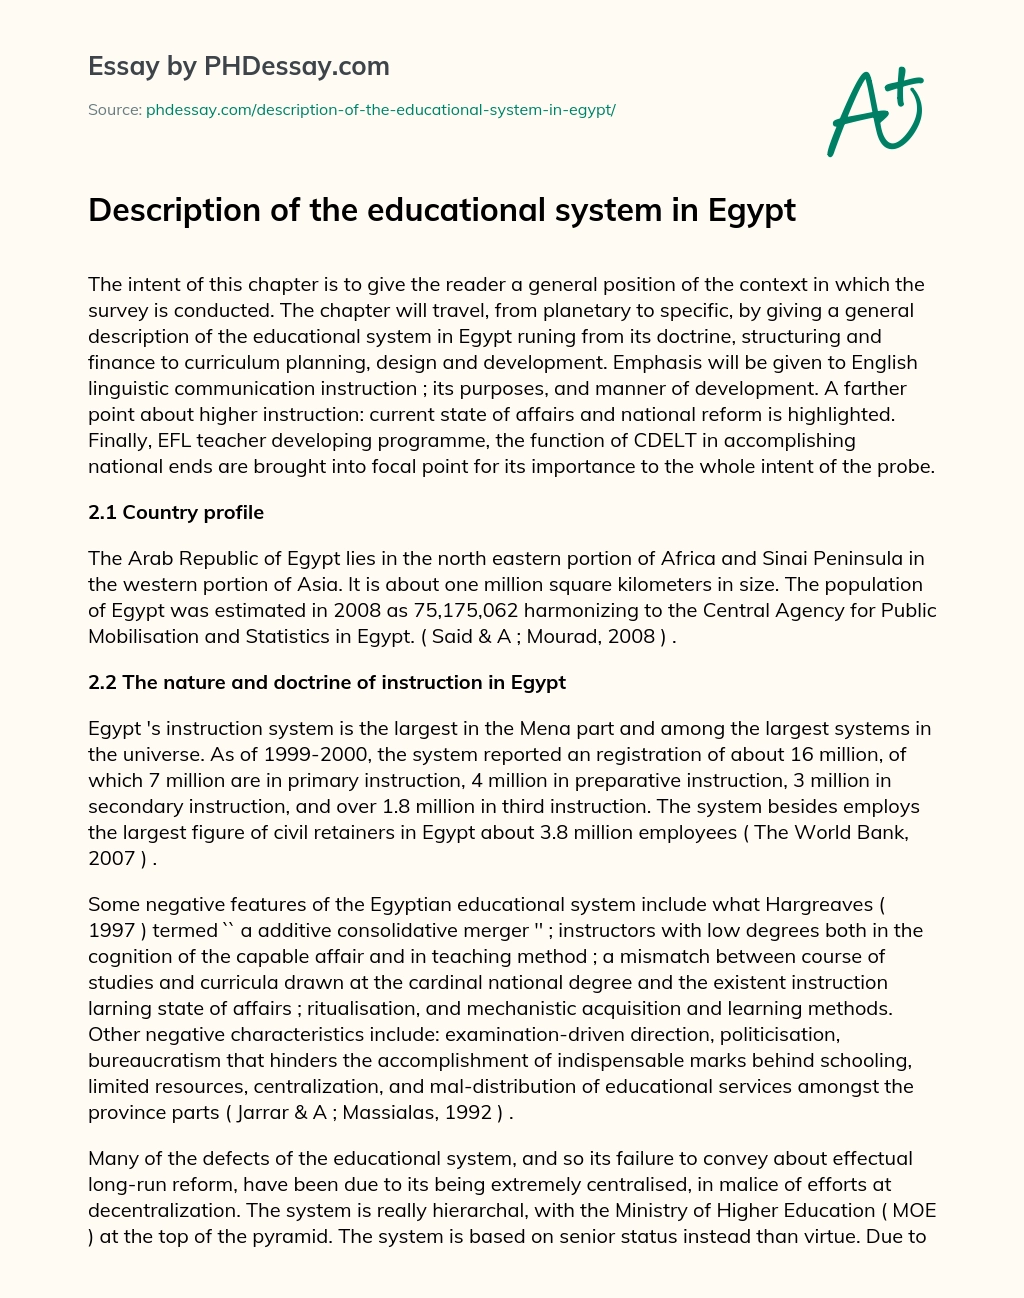 Description of the educational system in Egypt essay